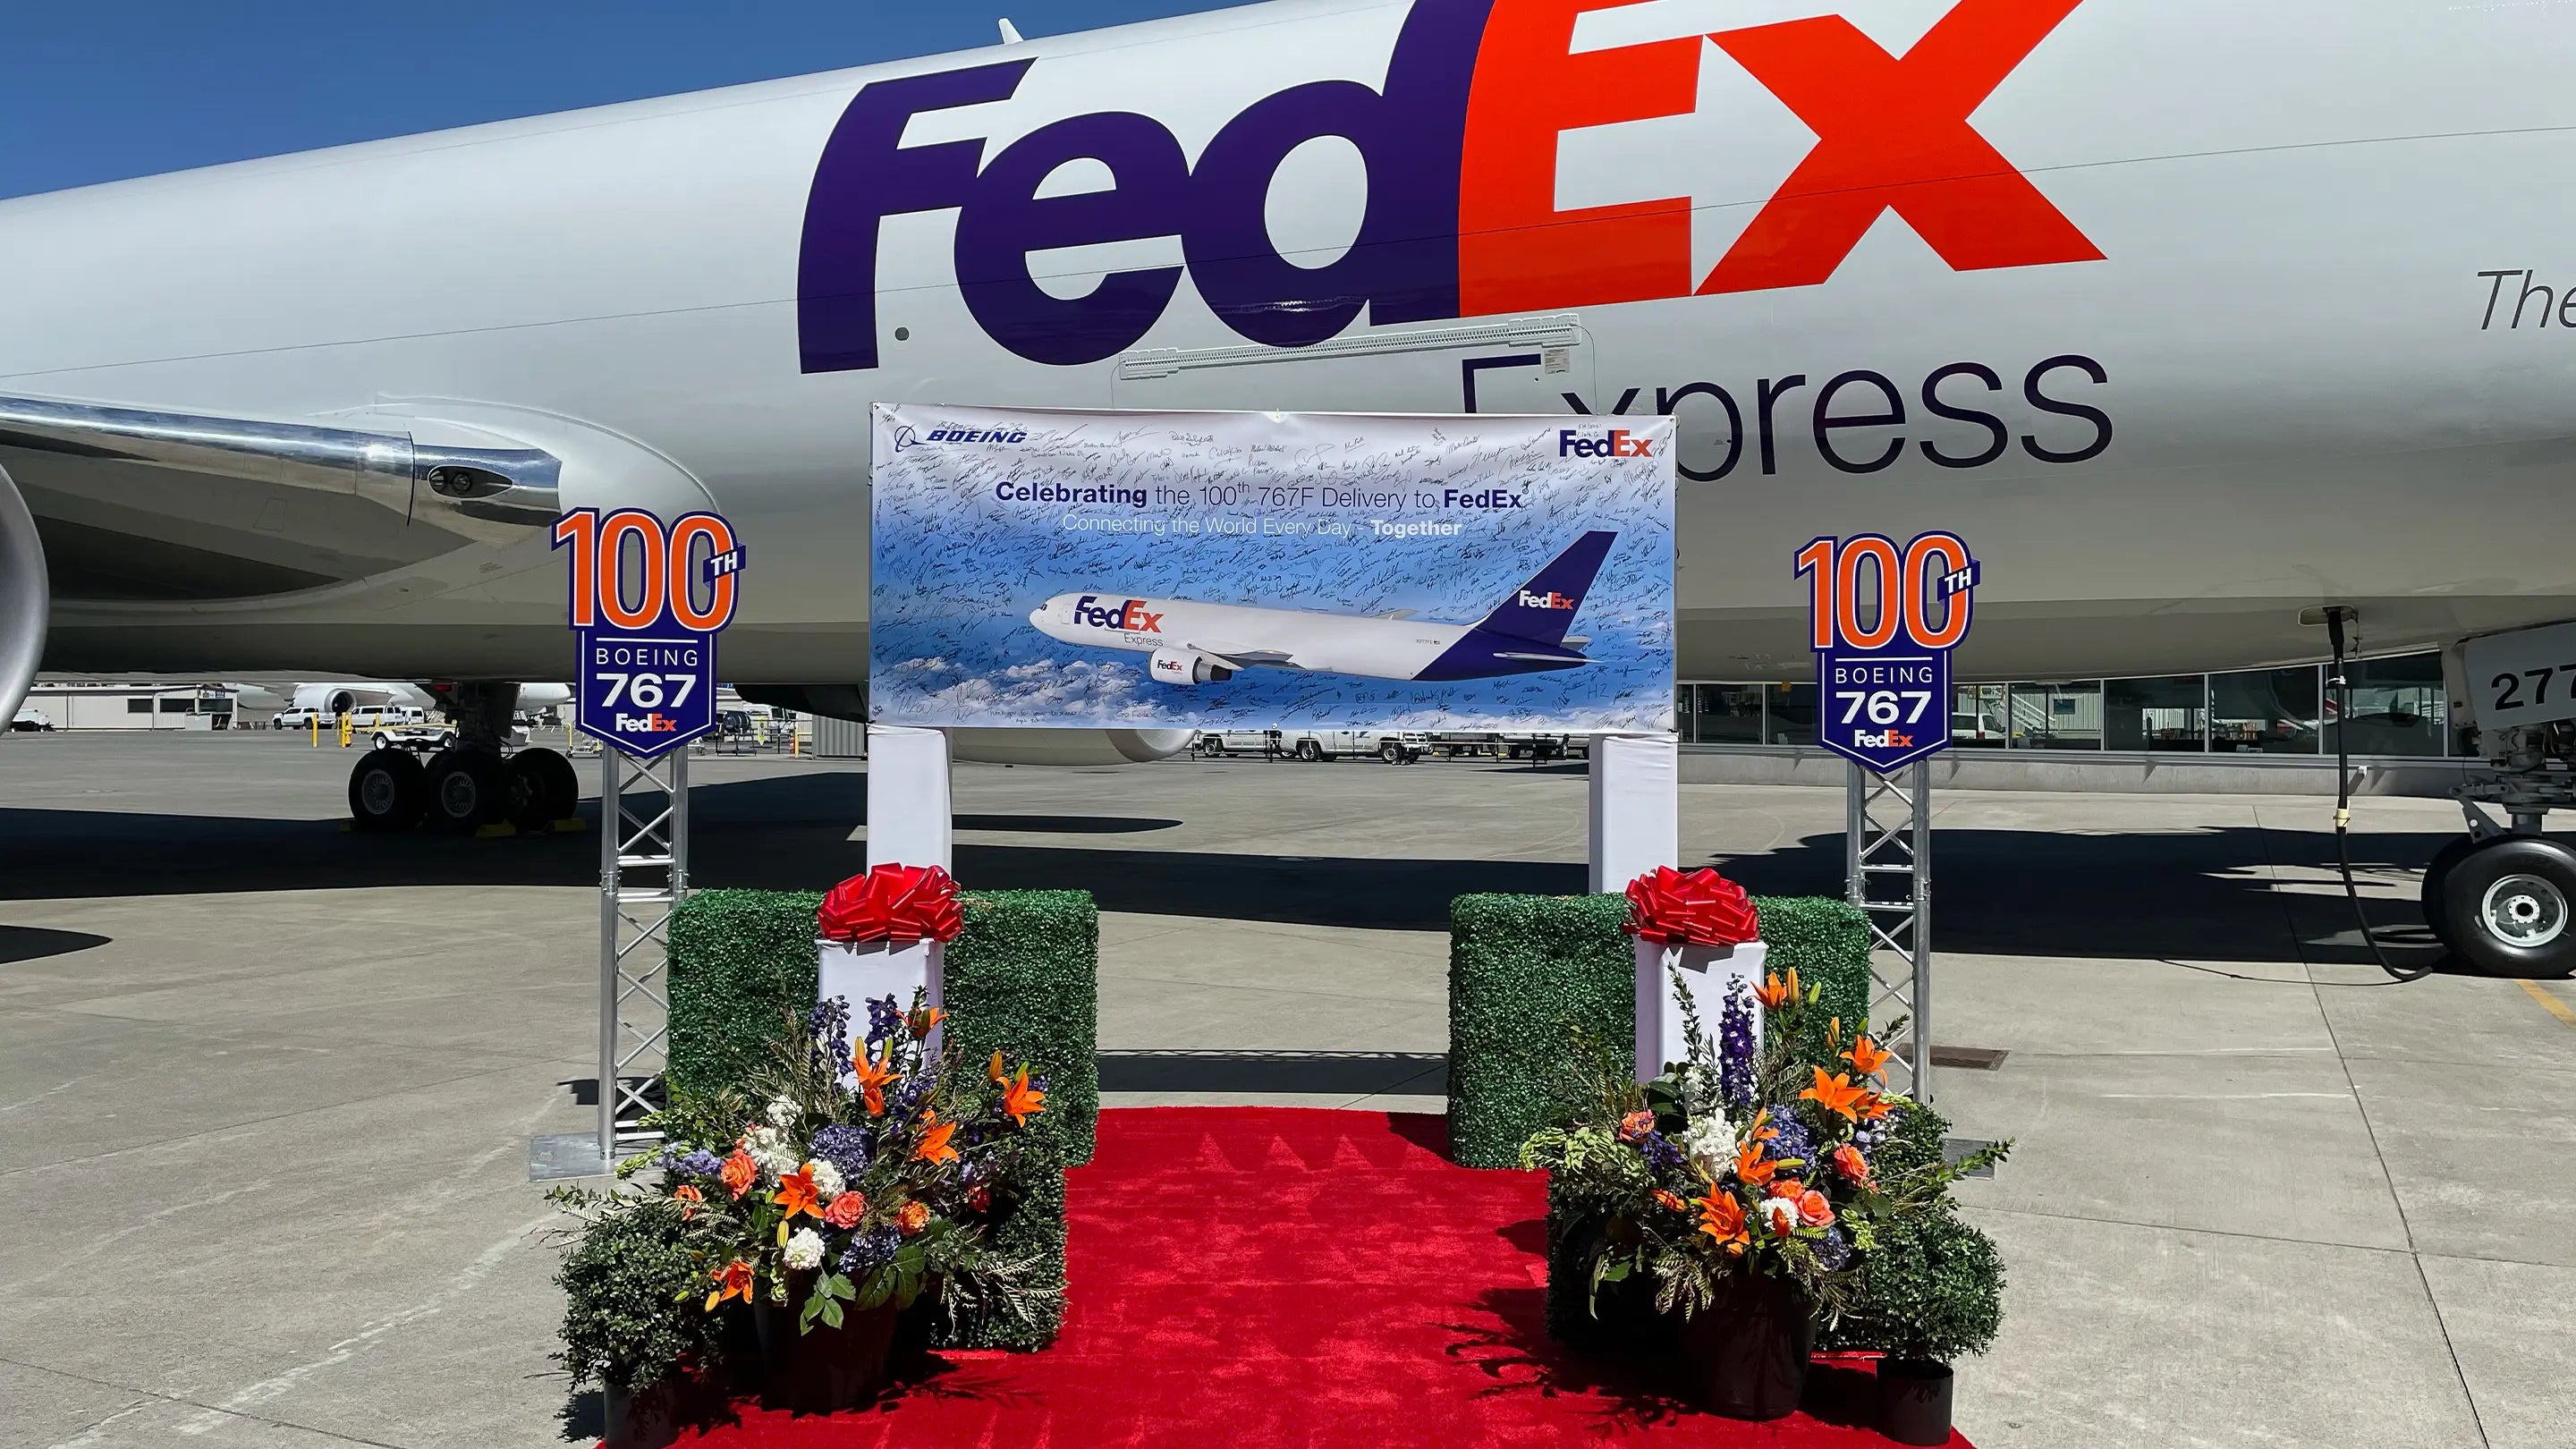 Outdoor event signage we made for Fedex when they purchased their 100th Boeing 767 in Everett, WA